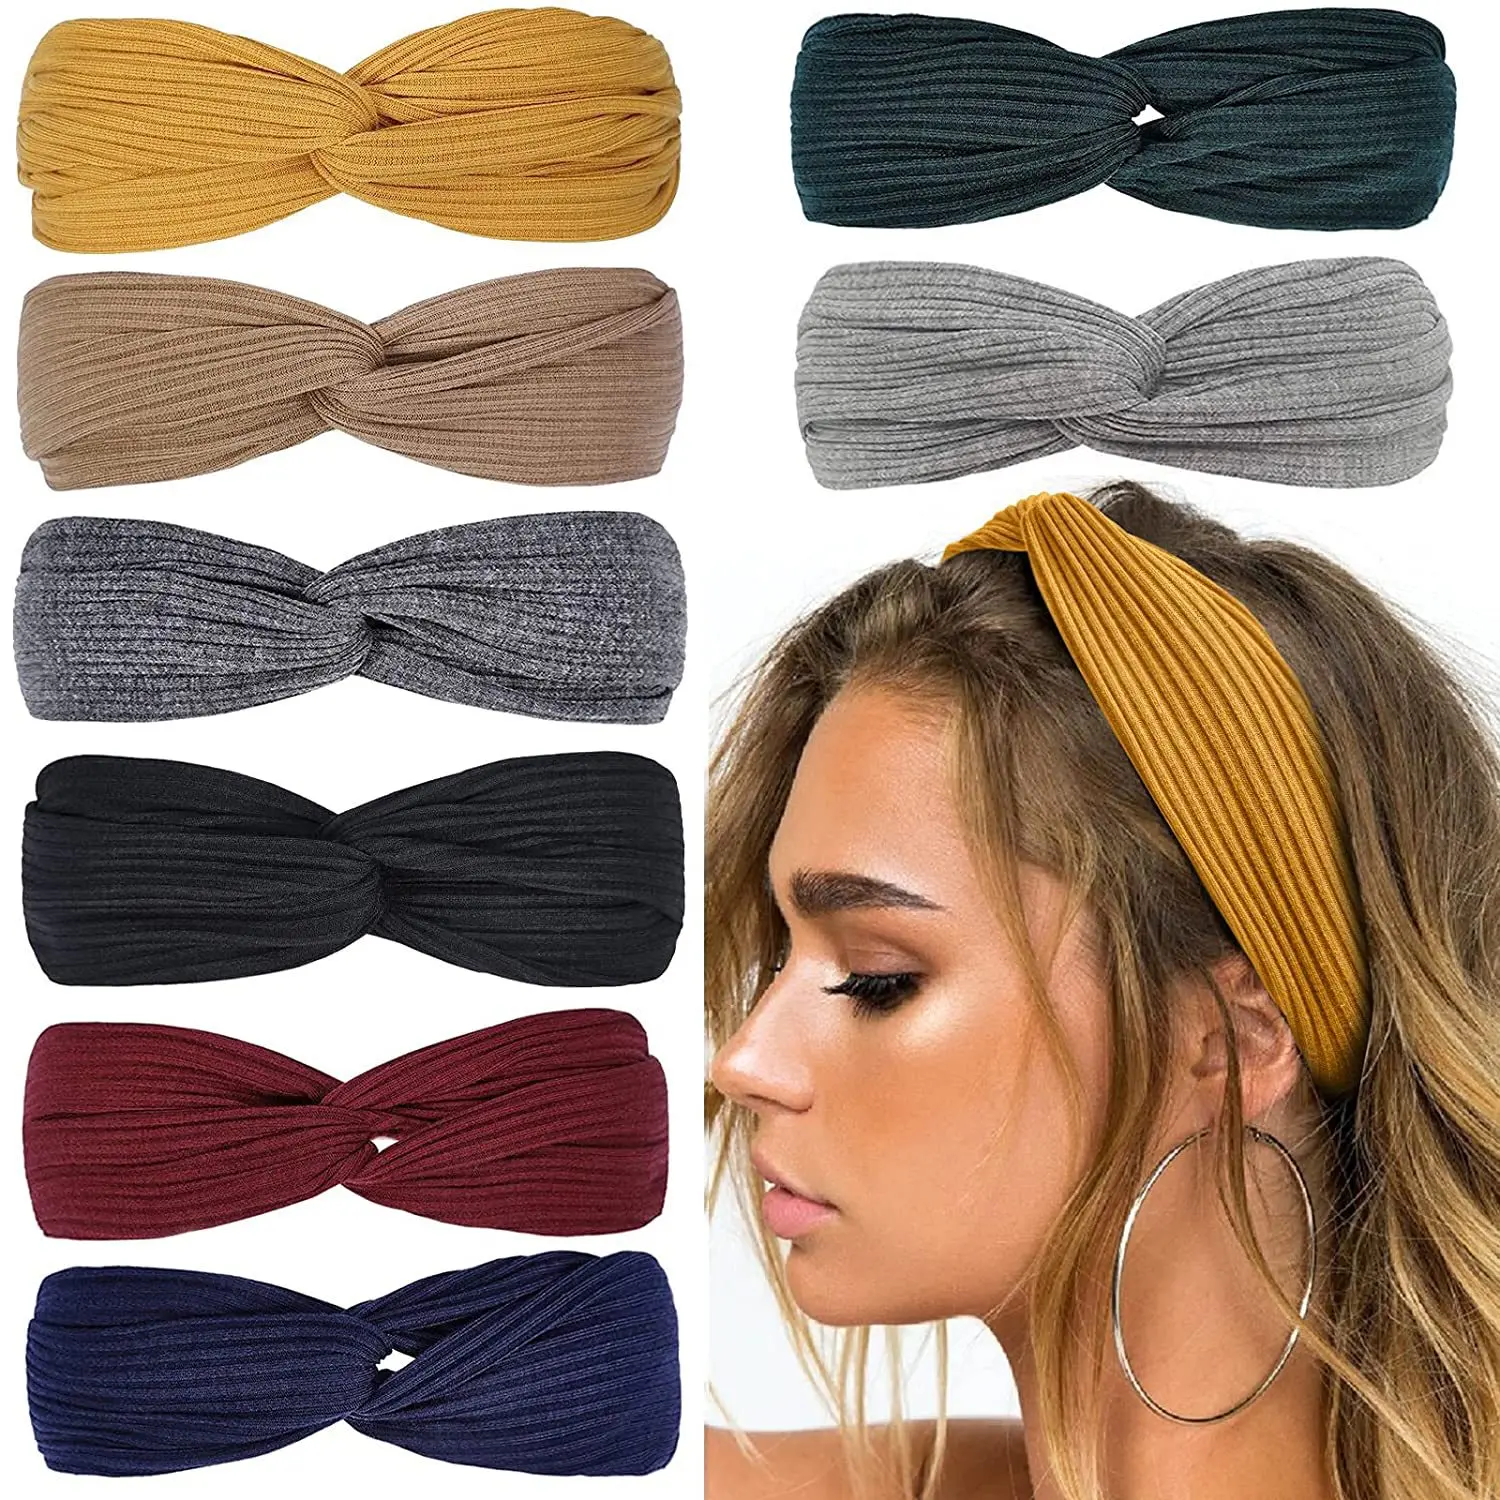 

Headbands Solid Color Women Twist Knotted Boho Stretchy Hair Bands Girls Criss Cross Turban Plain Headwrap Yoga Workout Vintage